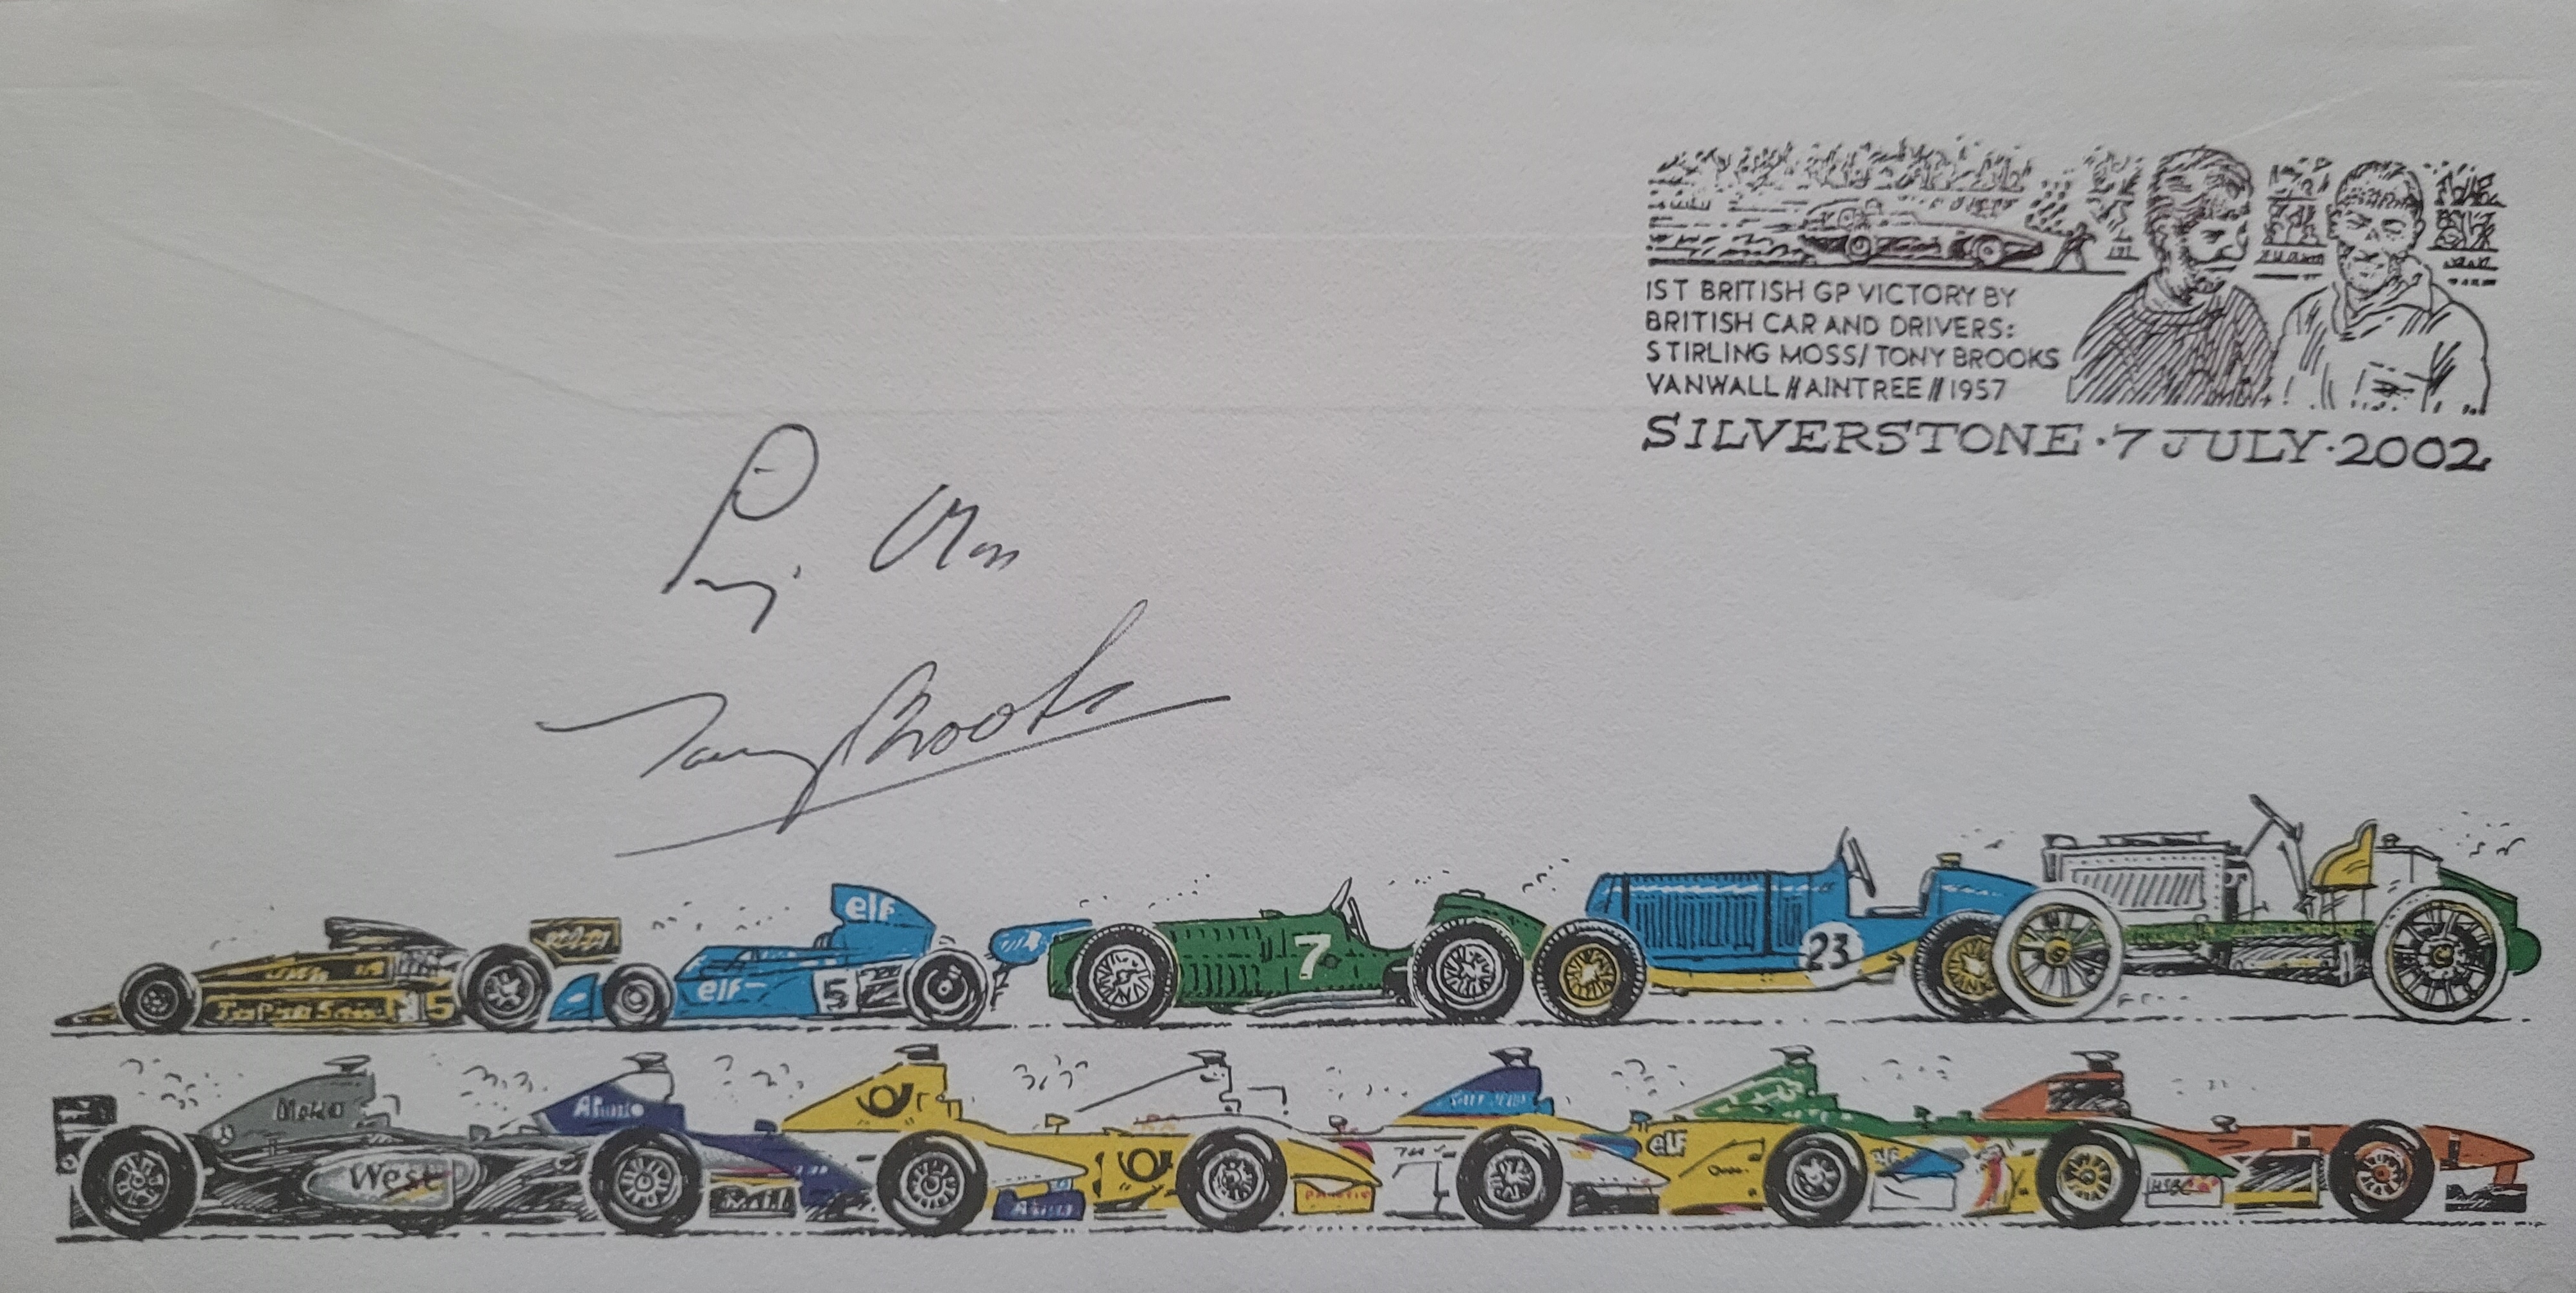 2002 SLVERSTONE MOTOR RACING LTD EDITION POSTAL COVER AUTOGRAPHED BY STIRLING MOSS & TONY BROOKES